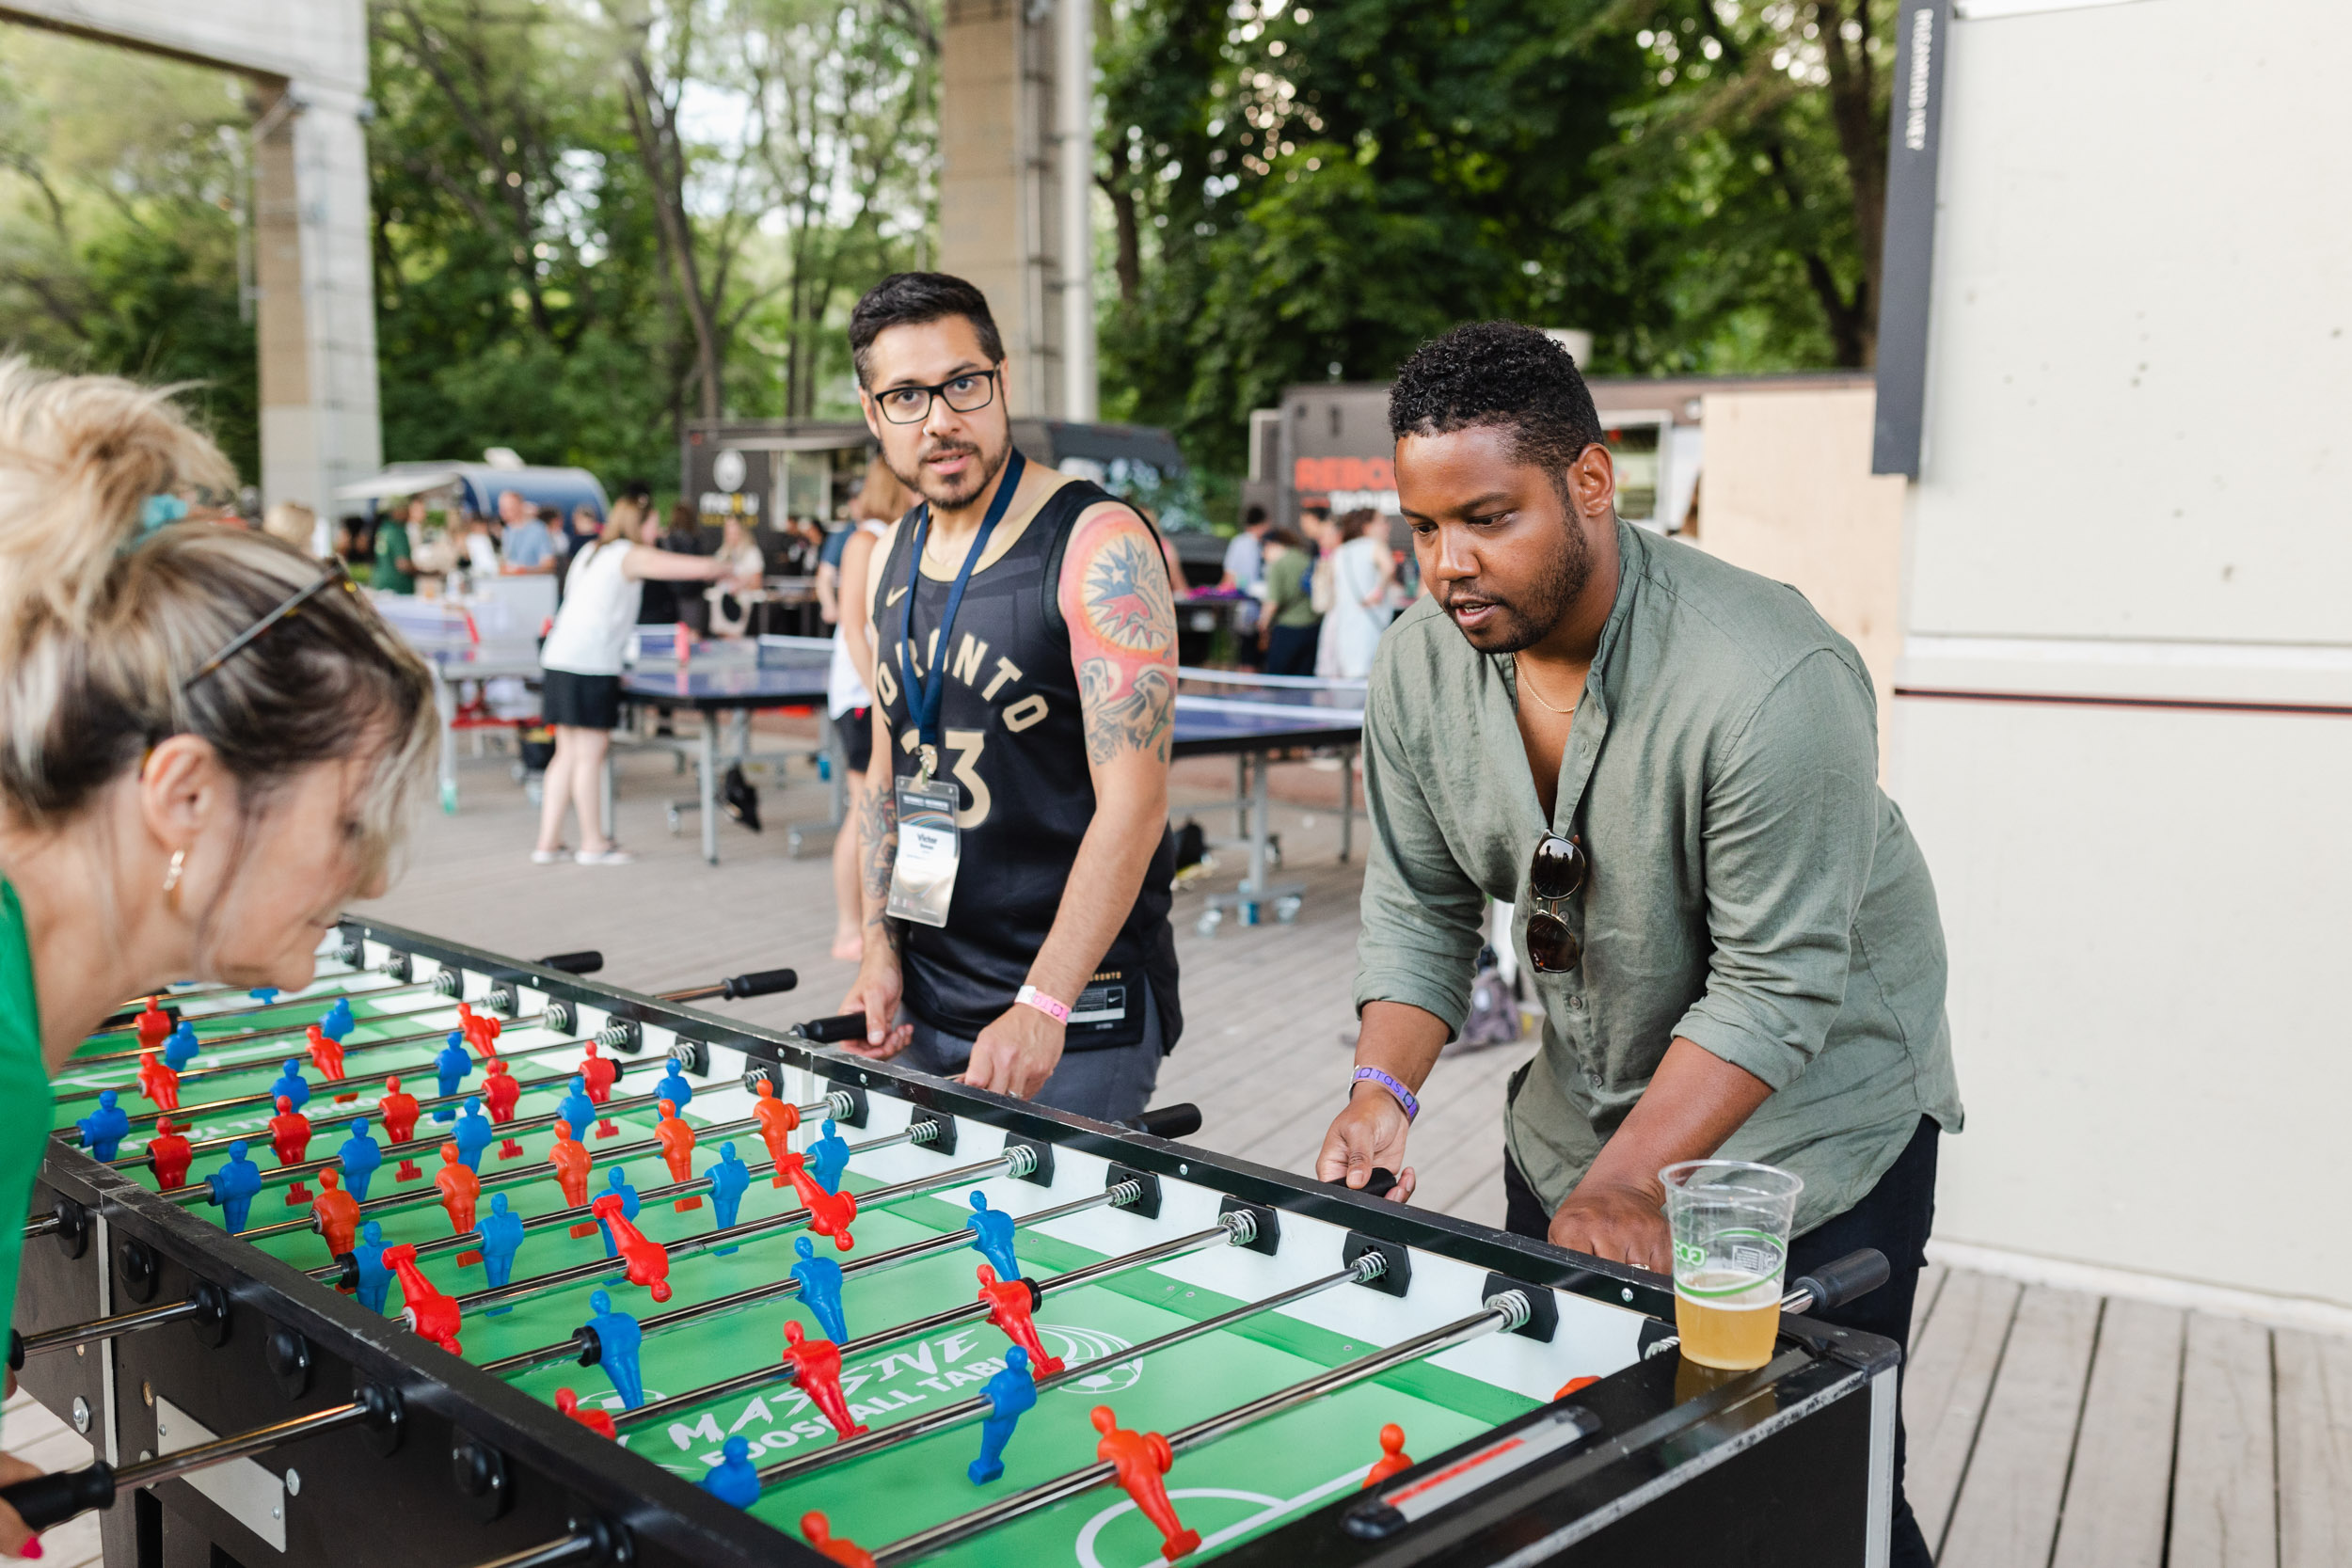 A group of people playing foosball at a conference.